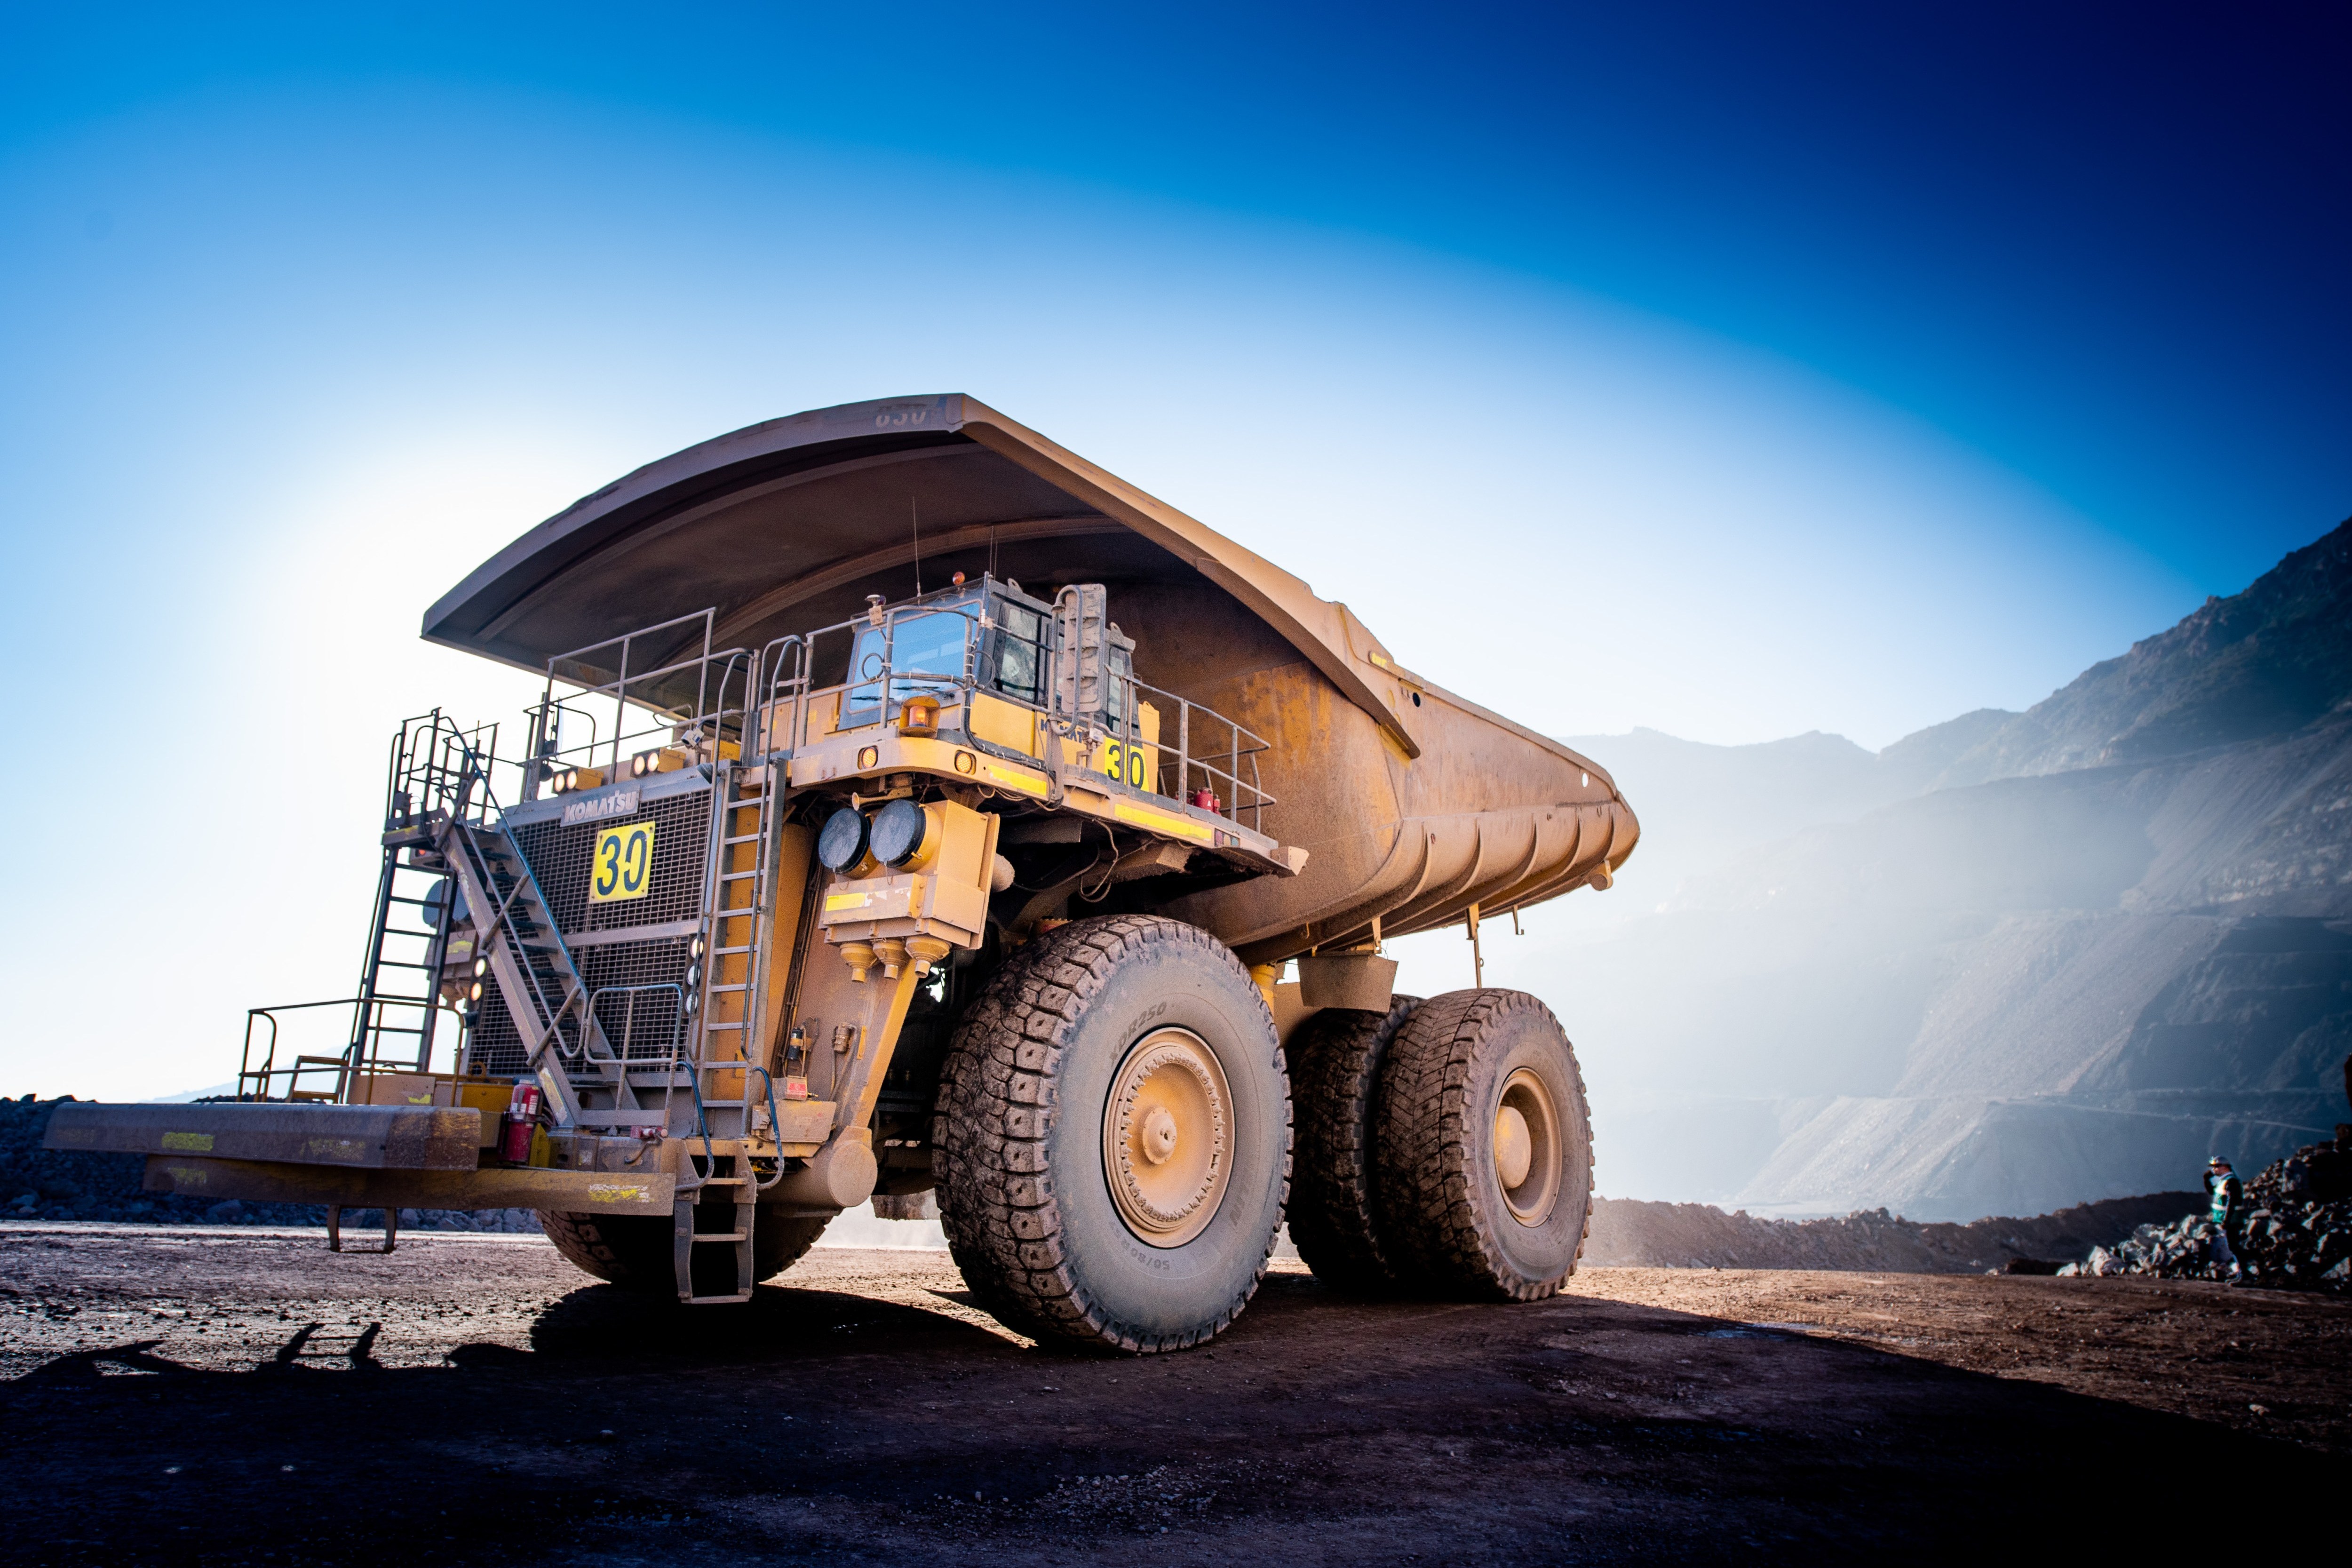 Anglo American spurns BHP’s ‘unattractive’ offer